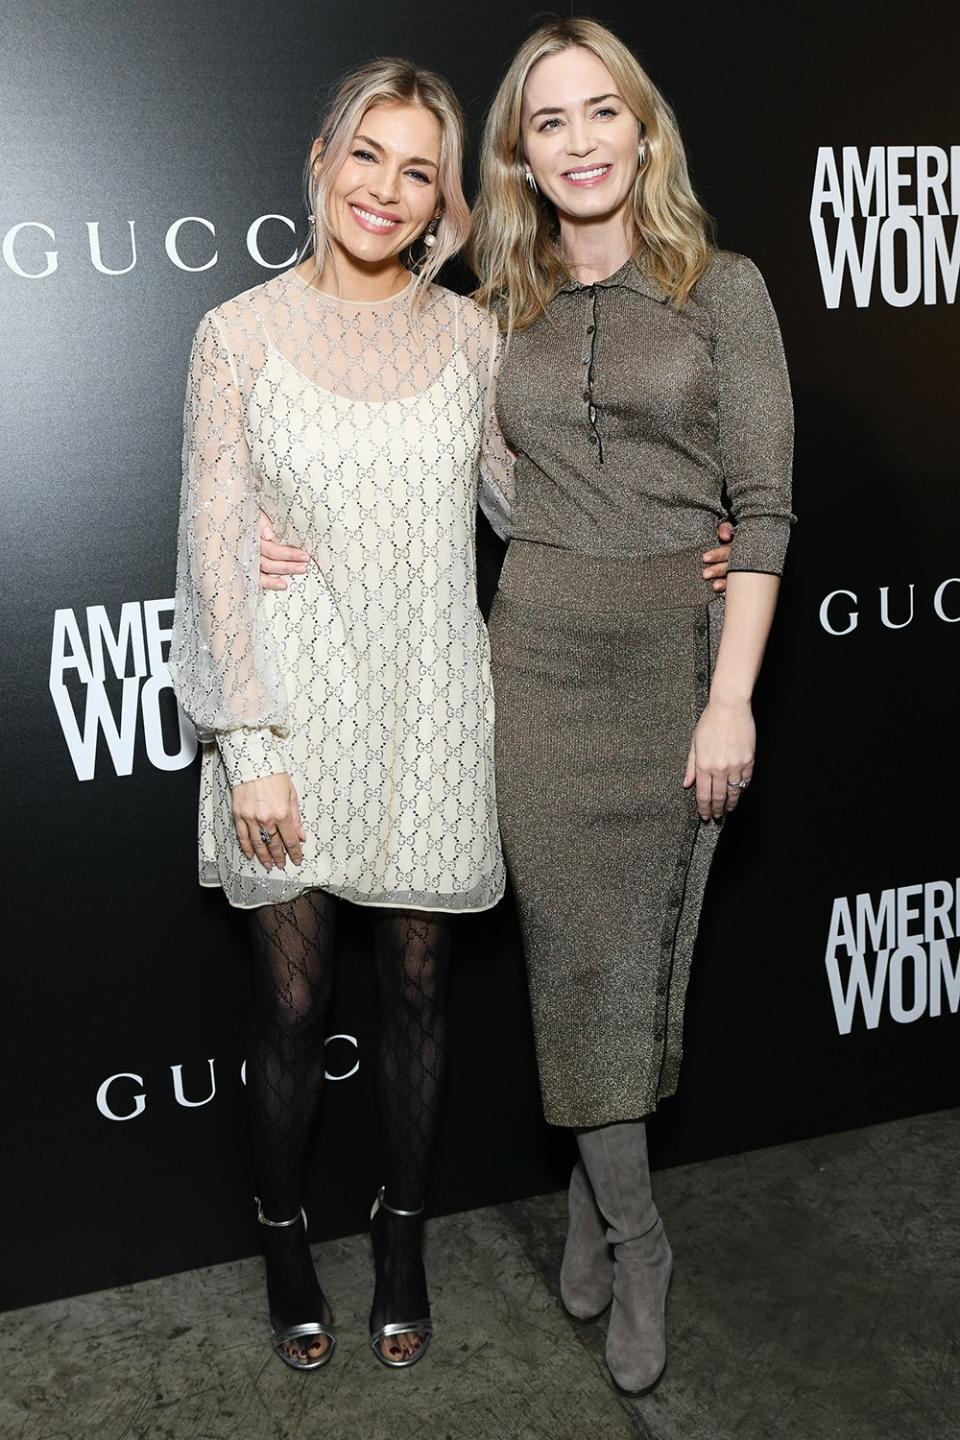 Sienna Miller and Emily Blunt attend the Gucci and Cinema Society screening of <i>American Women</i> at Metrograph on Thursday in N.Y.C. 